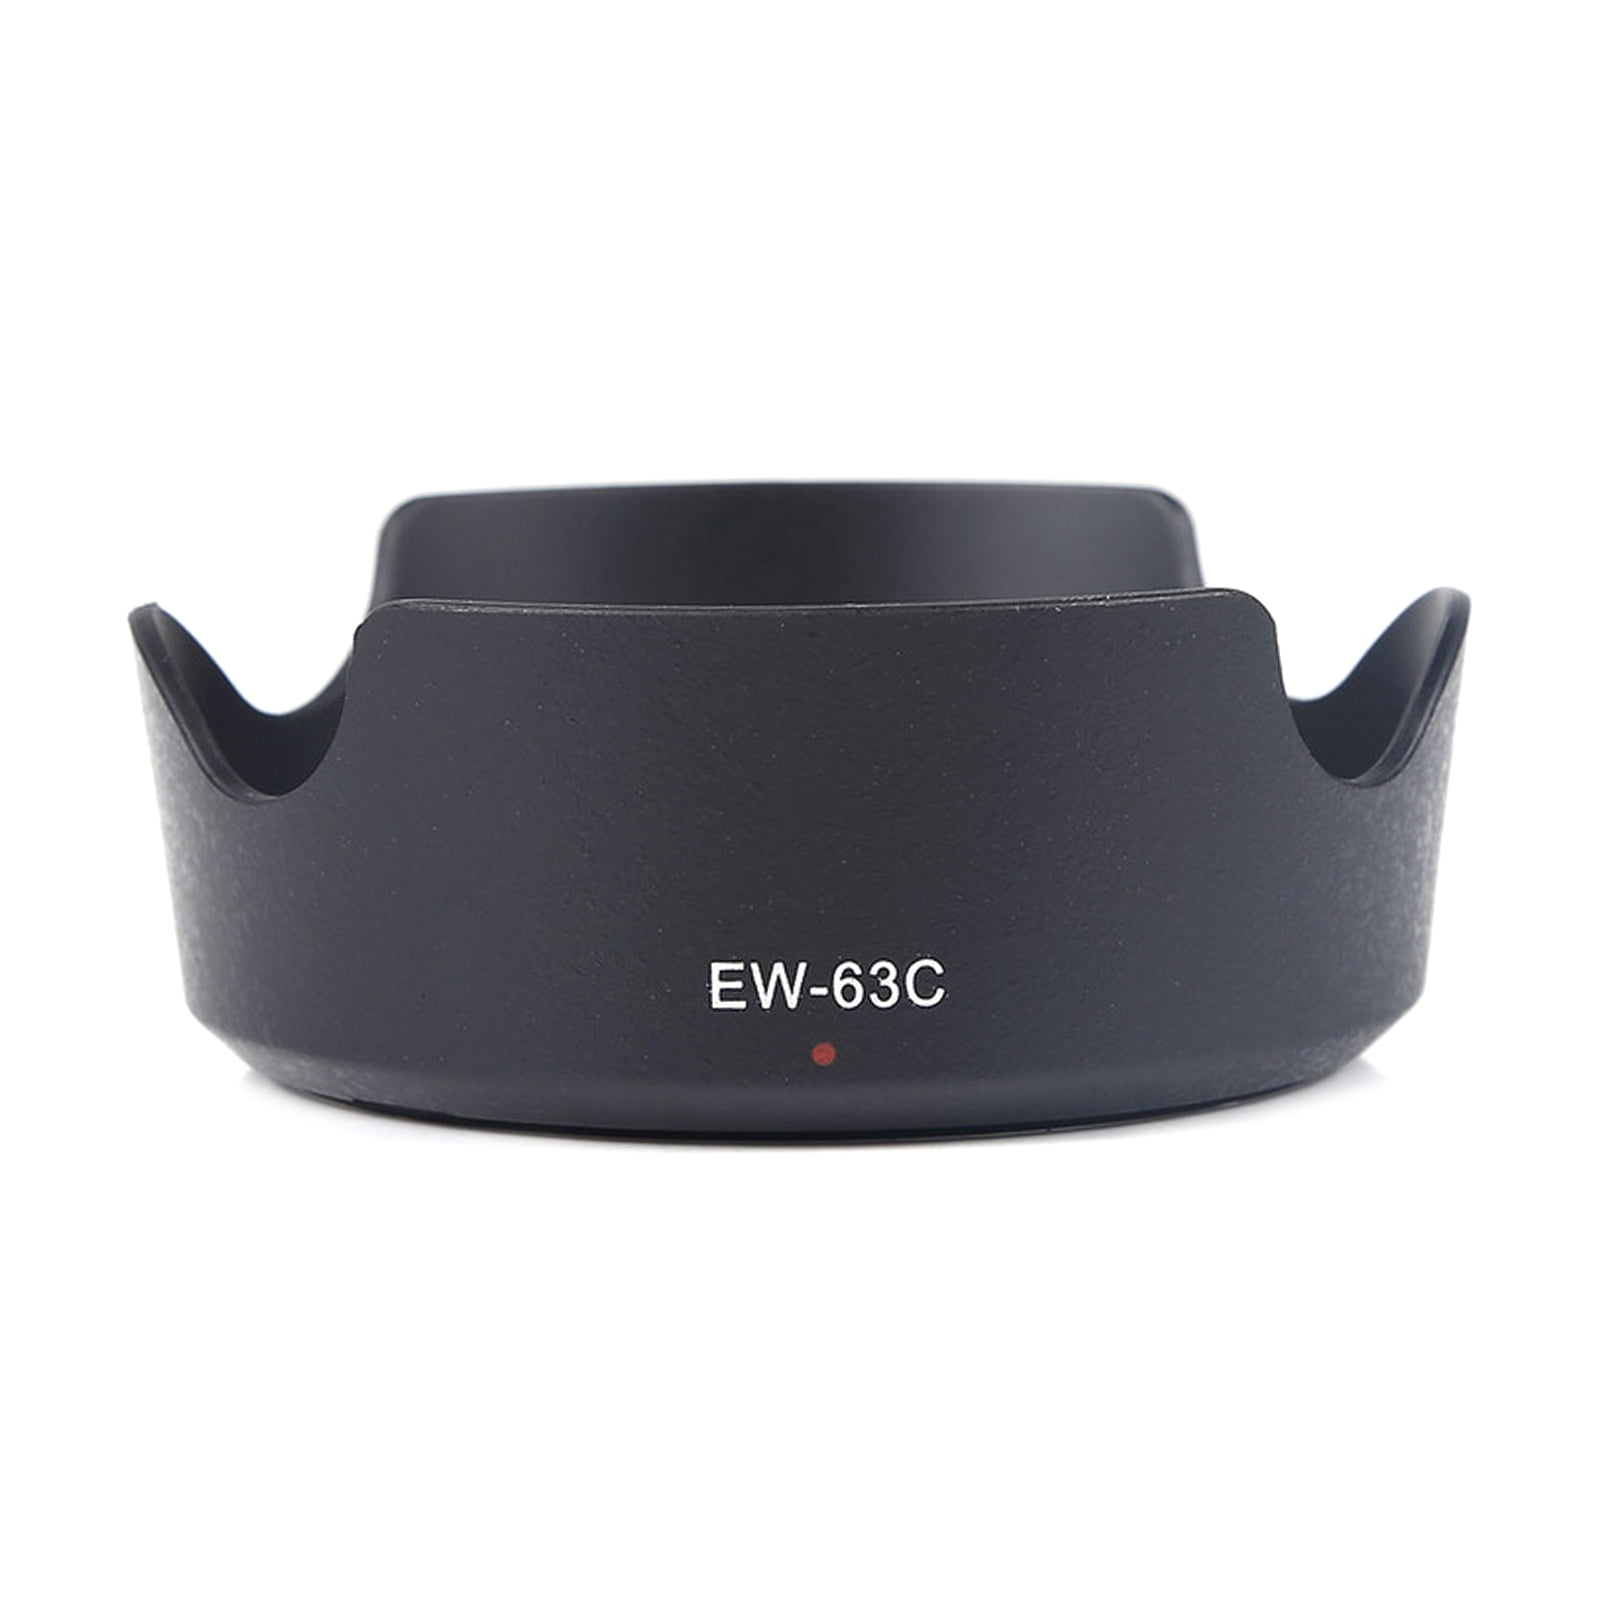 SLR Camera Lens Hood Cover Shade For Canon EW63C EF-S 18-55mm f/3.5-5.6 IS STM 